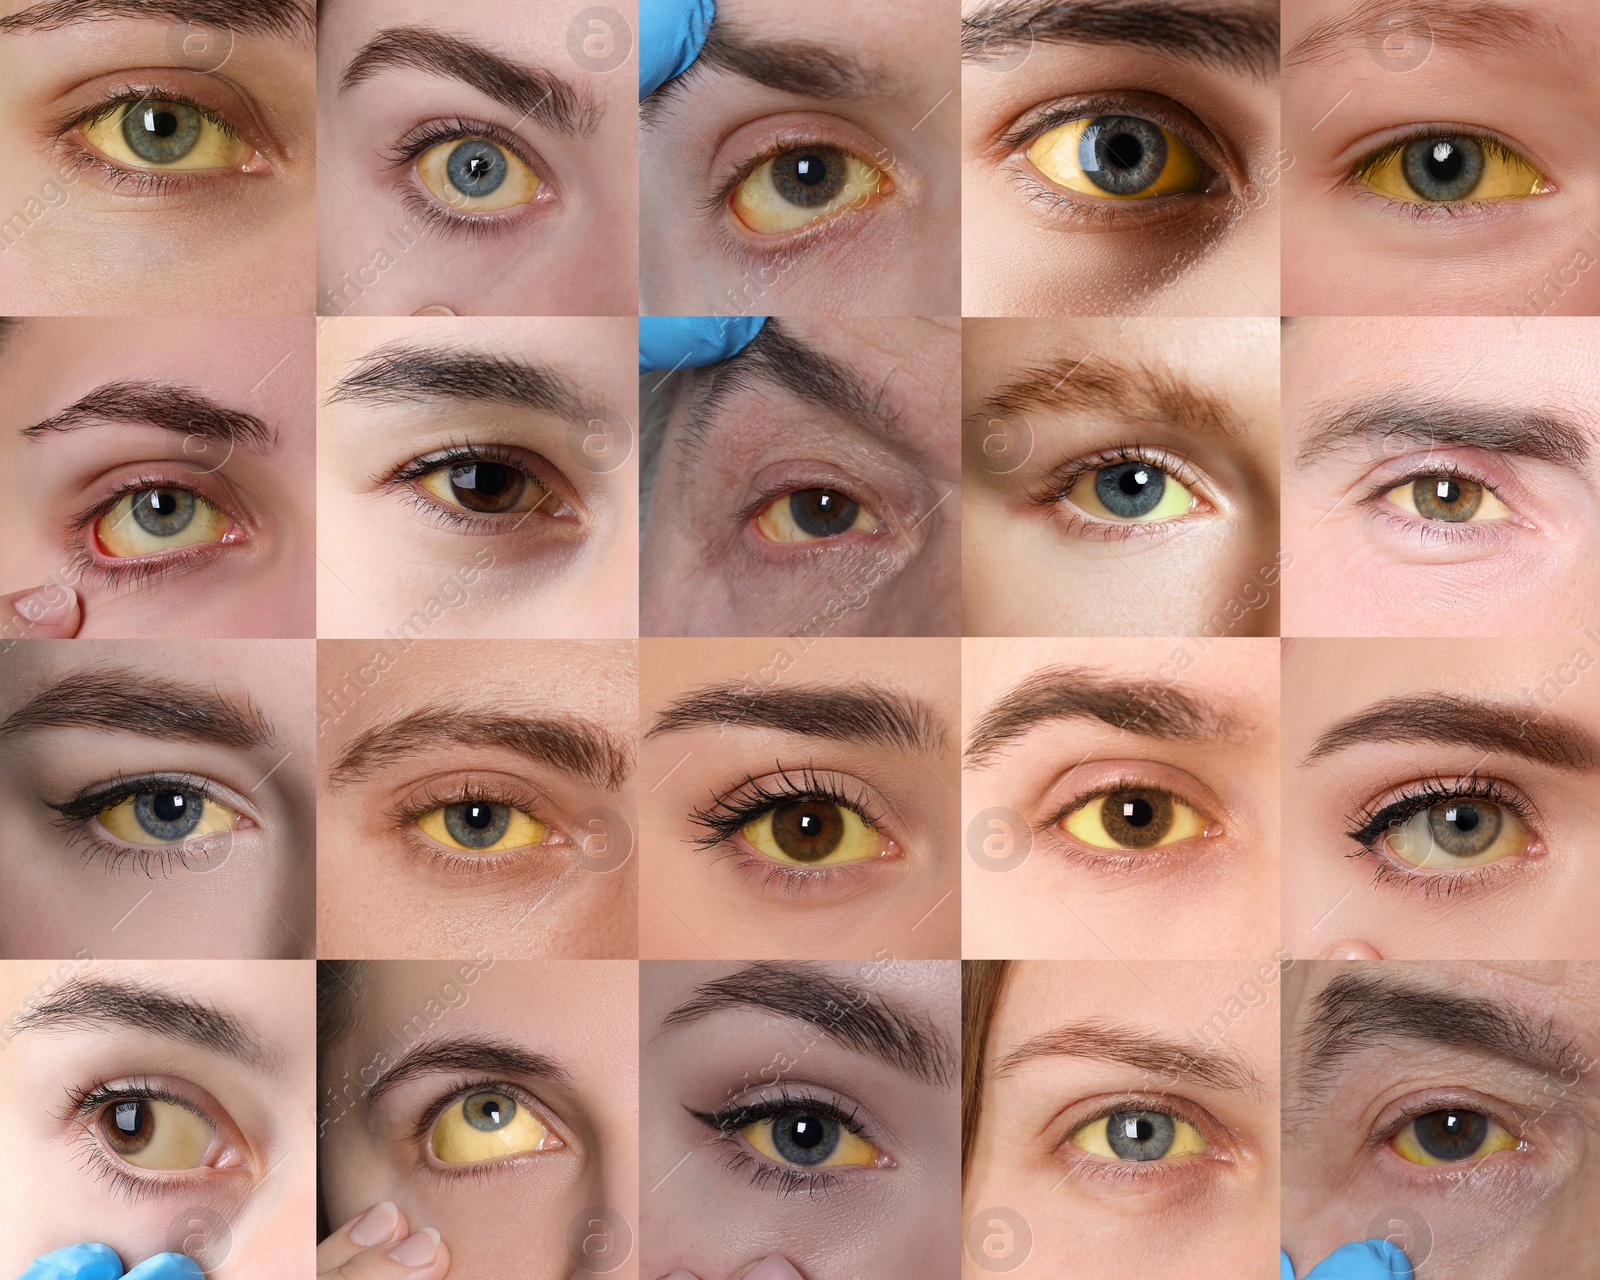 Image of Yellowing of eyes as symptom of hepatitis. Collage with photos of people